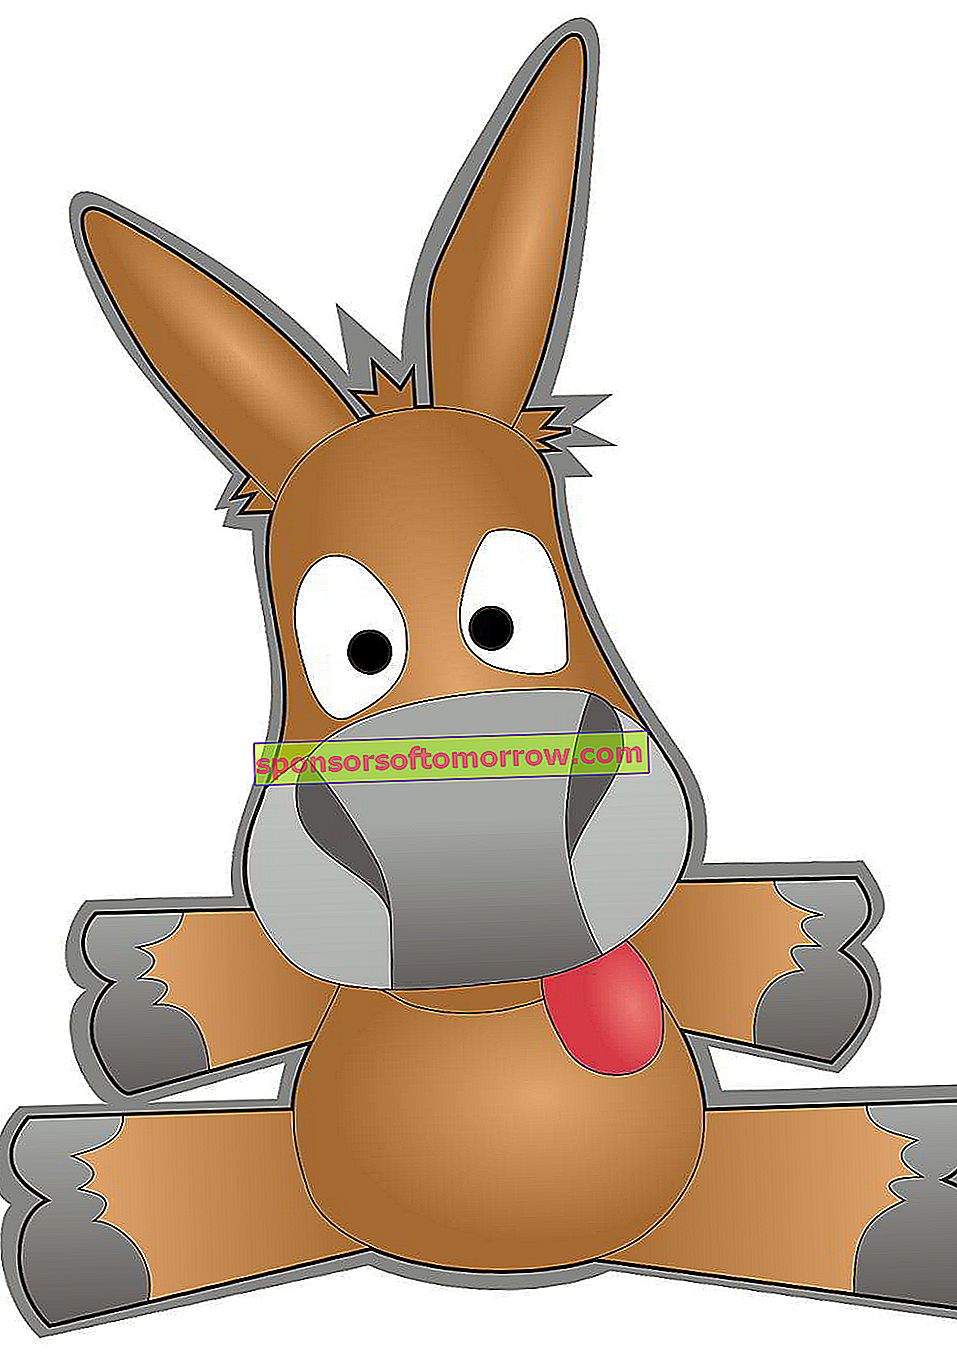 Reliable emule servers in 2019 and how to use them